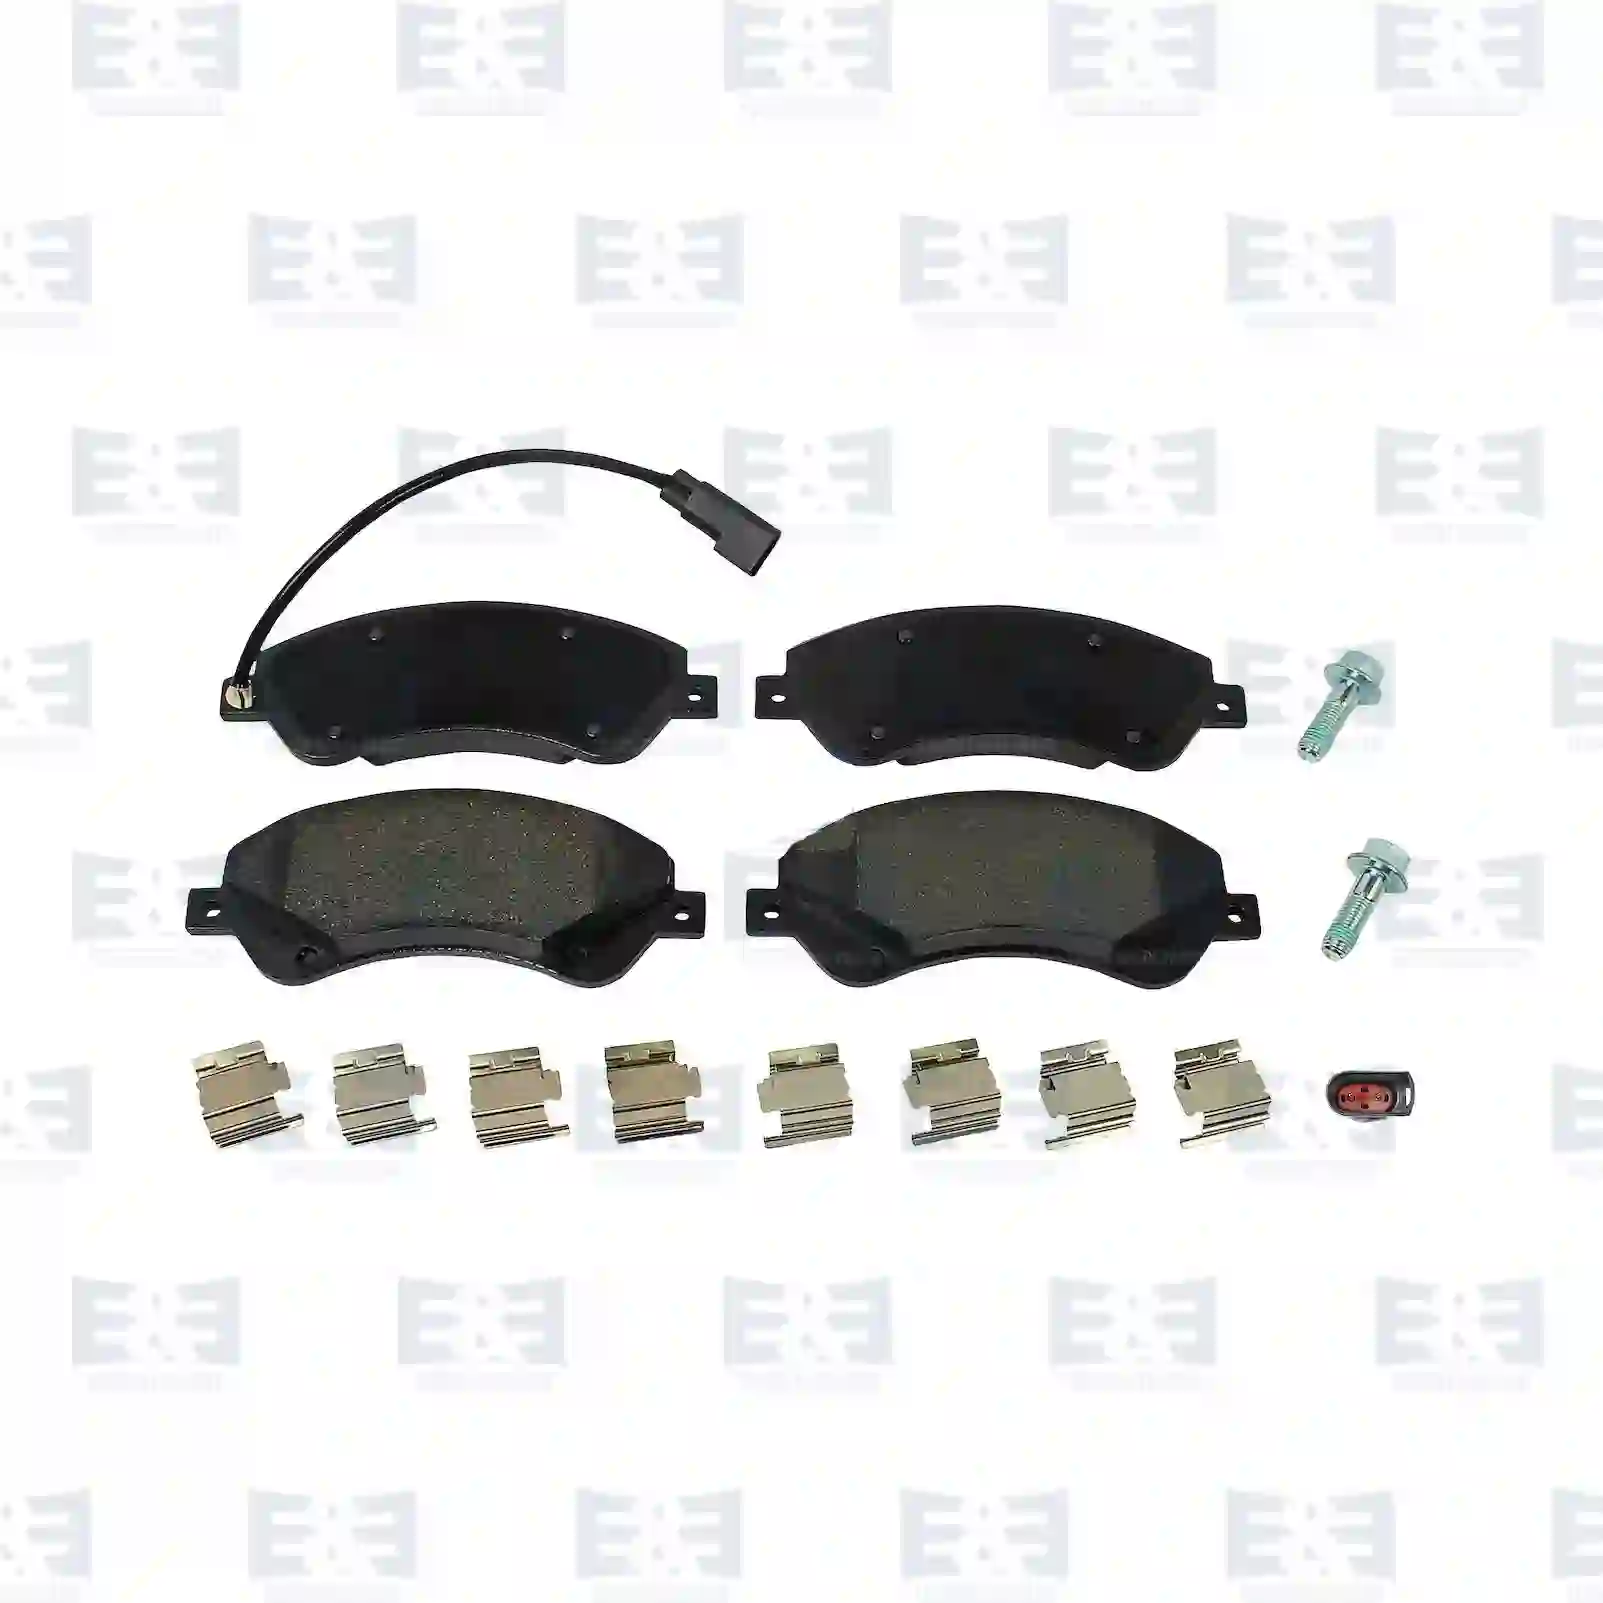 Brake Disc Disc brake pad kit, with accessories, EE No 2E2296619 ,  oem no:1371403, 1433954, 1534428, 1554523, 1560023, 1721086, 1824347, 6C11-2K021-BC, ME6C1J-2K021-BA, ME6C1J-2K021-BB E&E Truck Spare Parts | Truck Spare Parts, Auotomotive Spare Parts